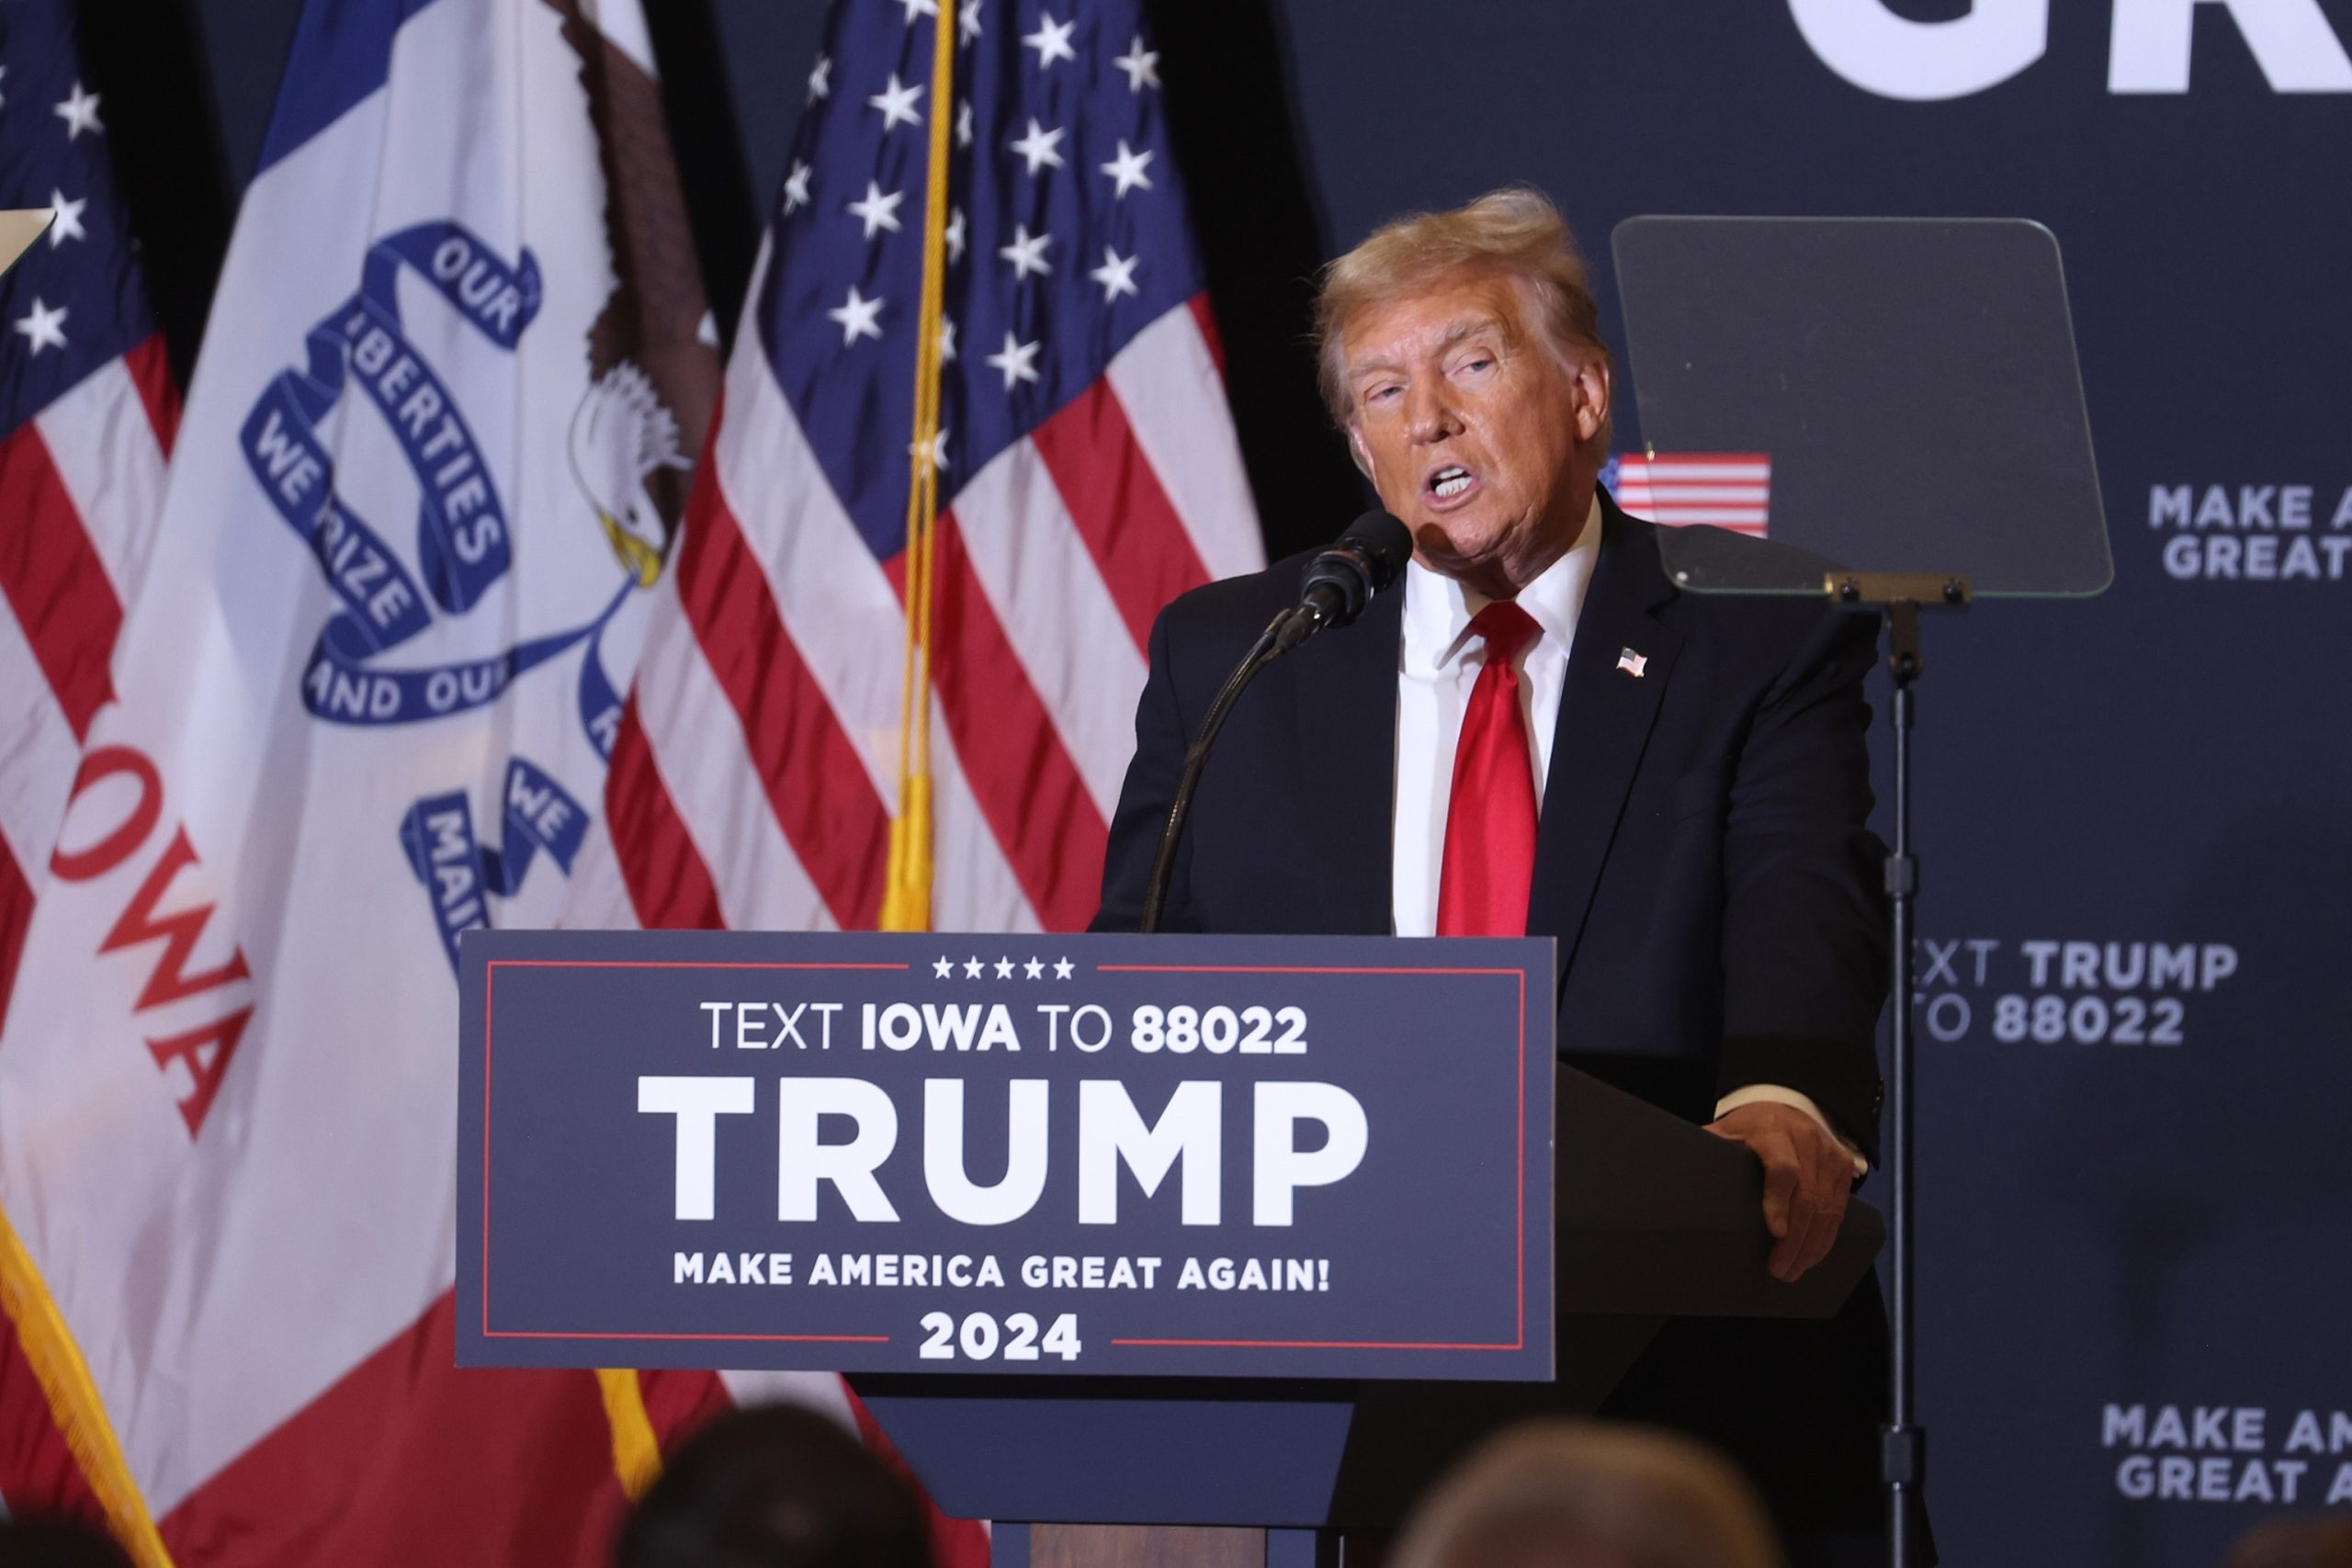 Michigan Court of Appeals affirms Trump's eligibility for 2024 GOP